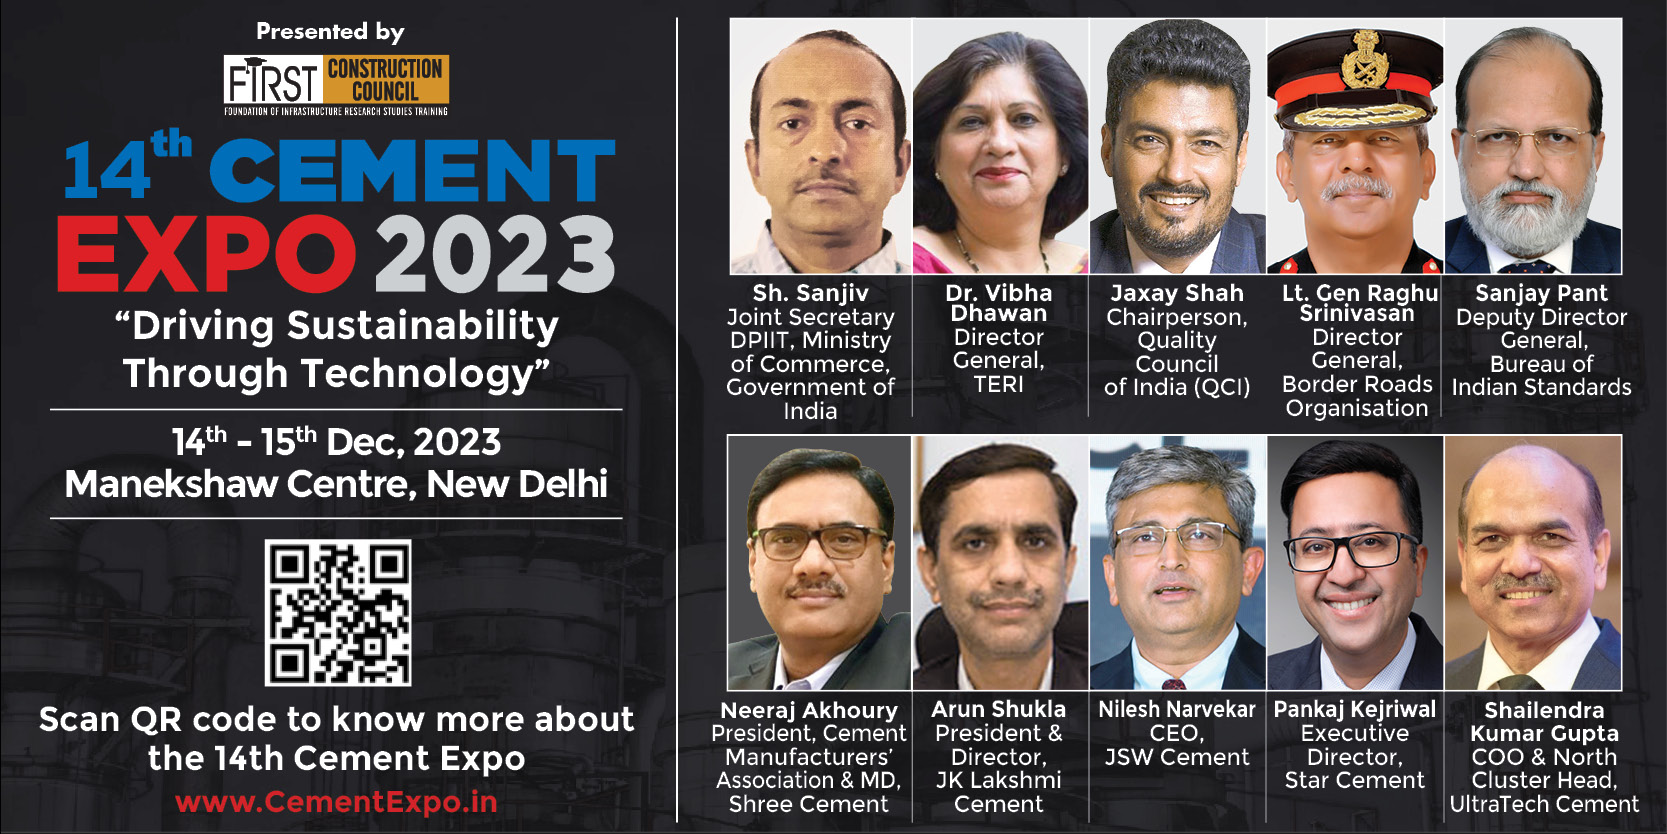 DPIIT, Ministries & FIRST Construction Council to discuss sustainability with cement industry captains at Cement EXPO 2023 on Dec 14-15